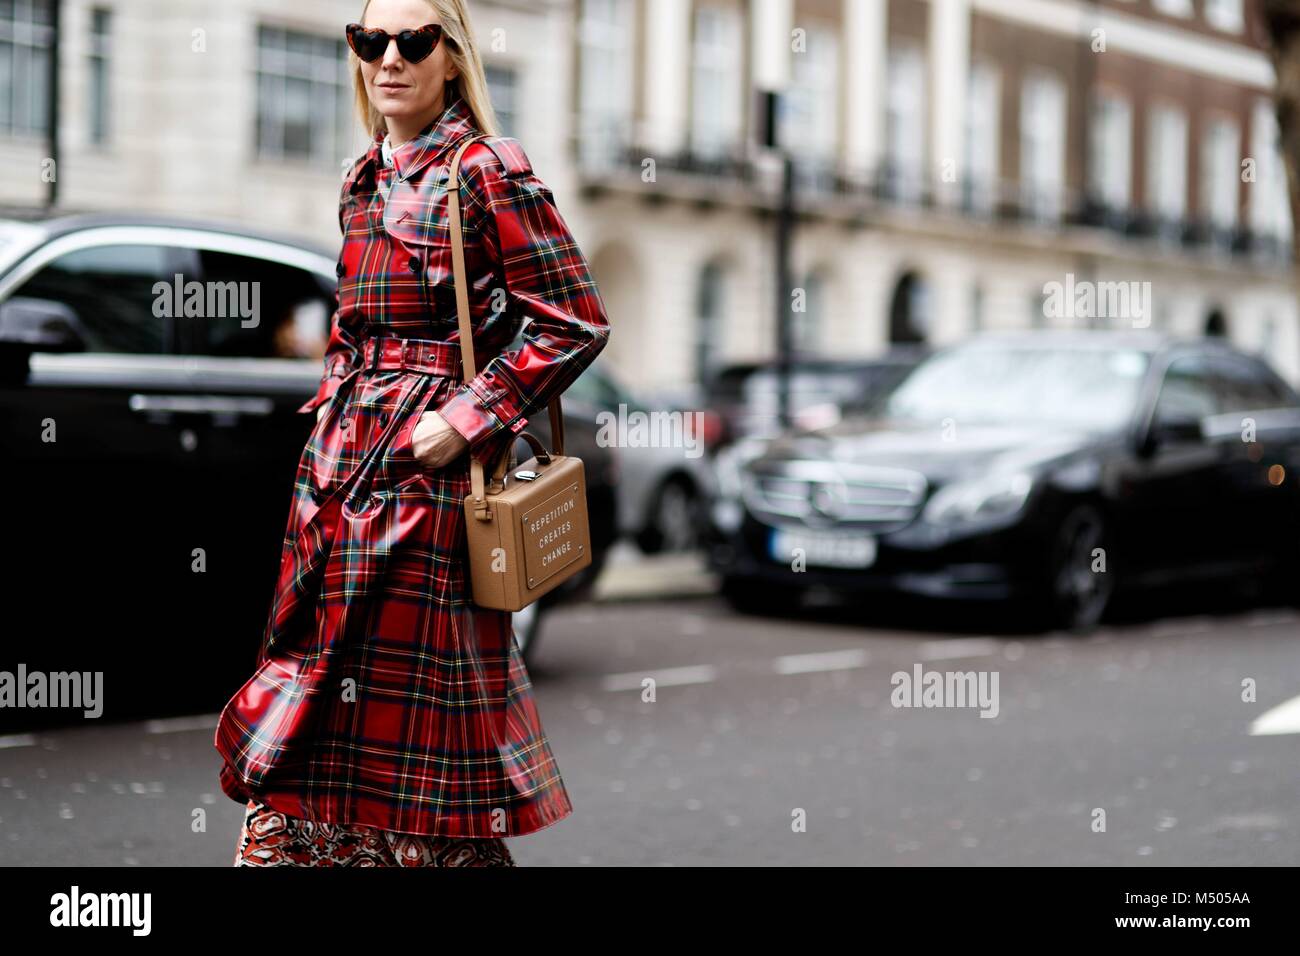 London, UK. 18th Feb, 2018. A chic showgoer posing outside the Delpozo runway show during London Fashion Week - Feb 18, 2018 - Credit: Runway Manhattan/Zach Dodds ***For Editorial Use Only*** | Verwendung weltweit/dpa/Alamy Live News Credit: dpa picture alliance/Alamy Live News Stock Photo